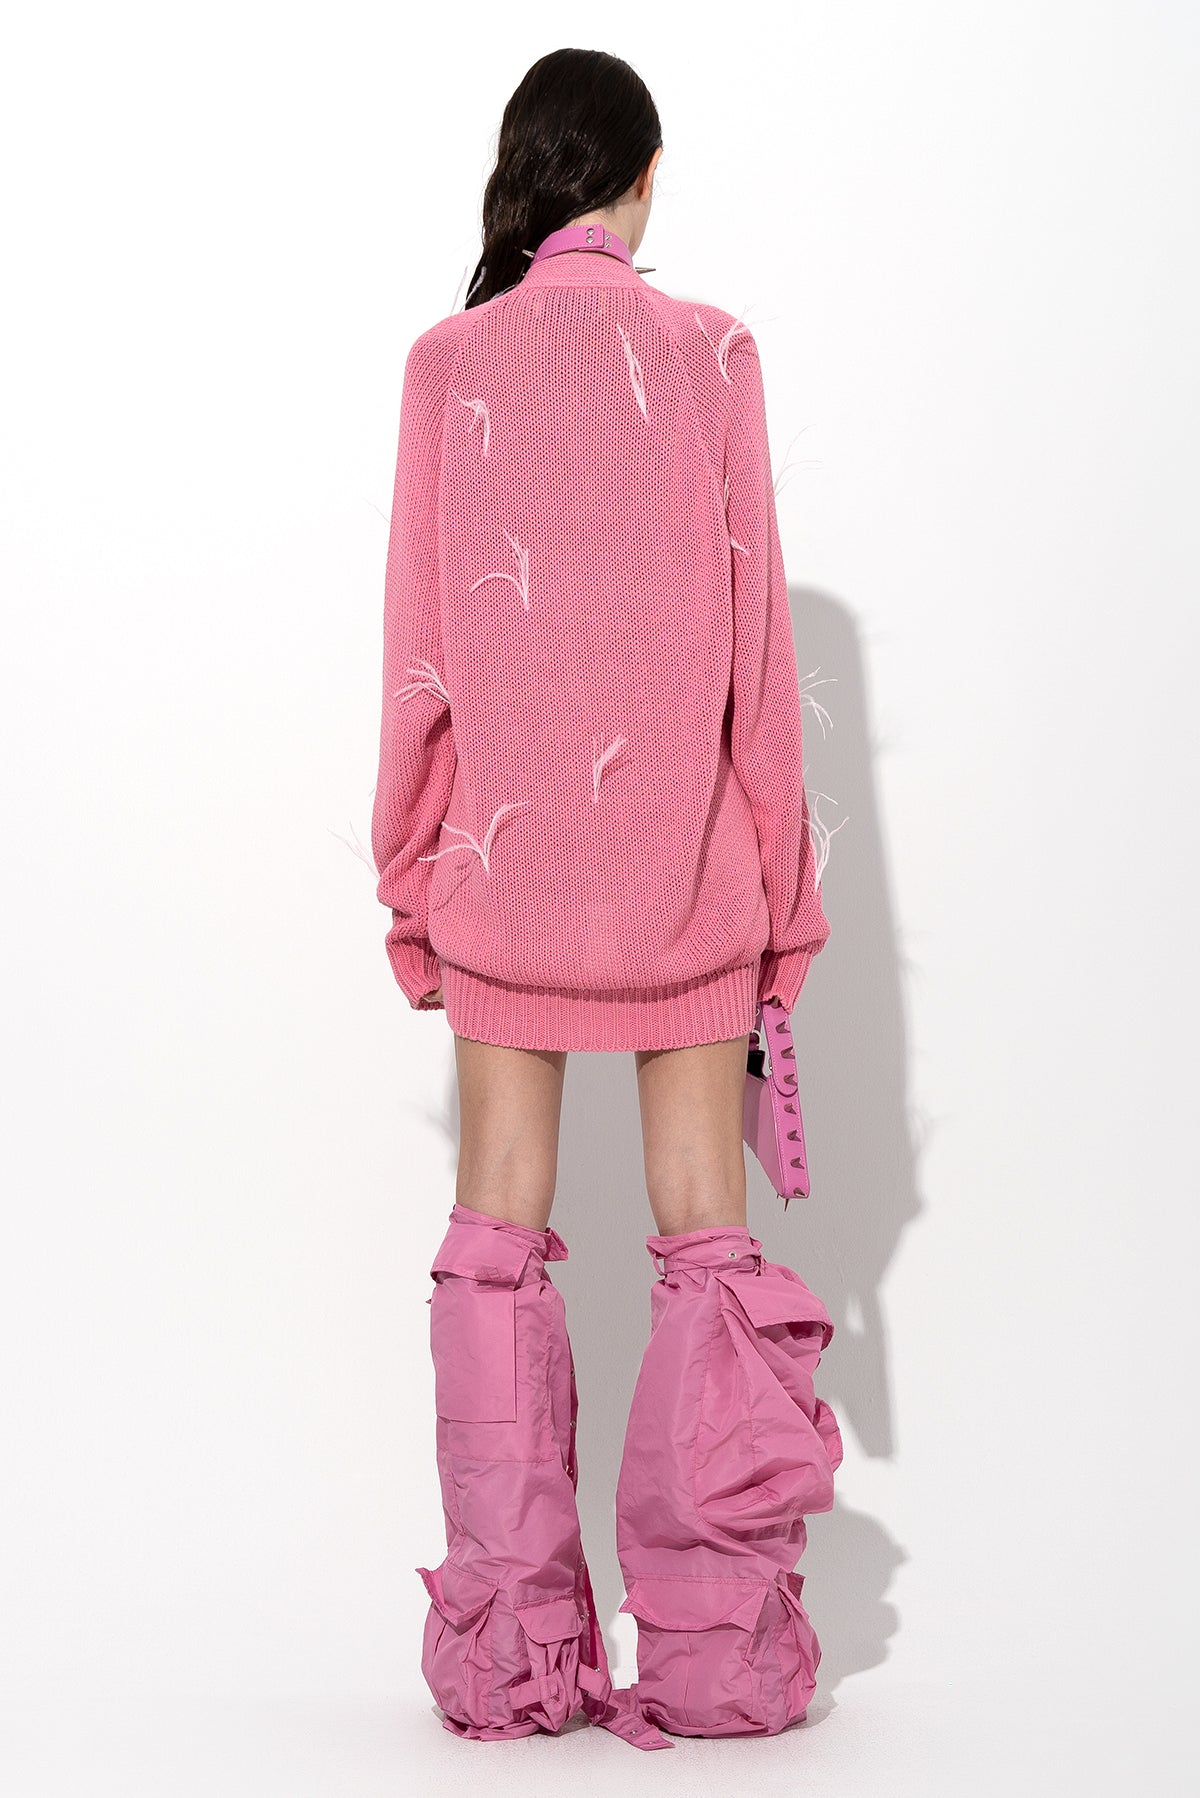 PINK OVERSIZED CARDIGAN WITH FEATHERS PULLS marques almeida